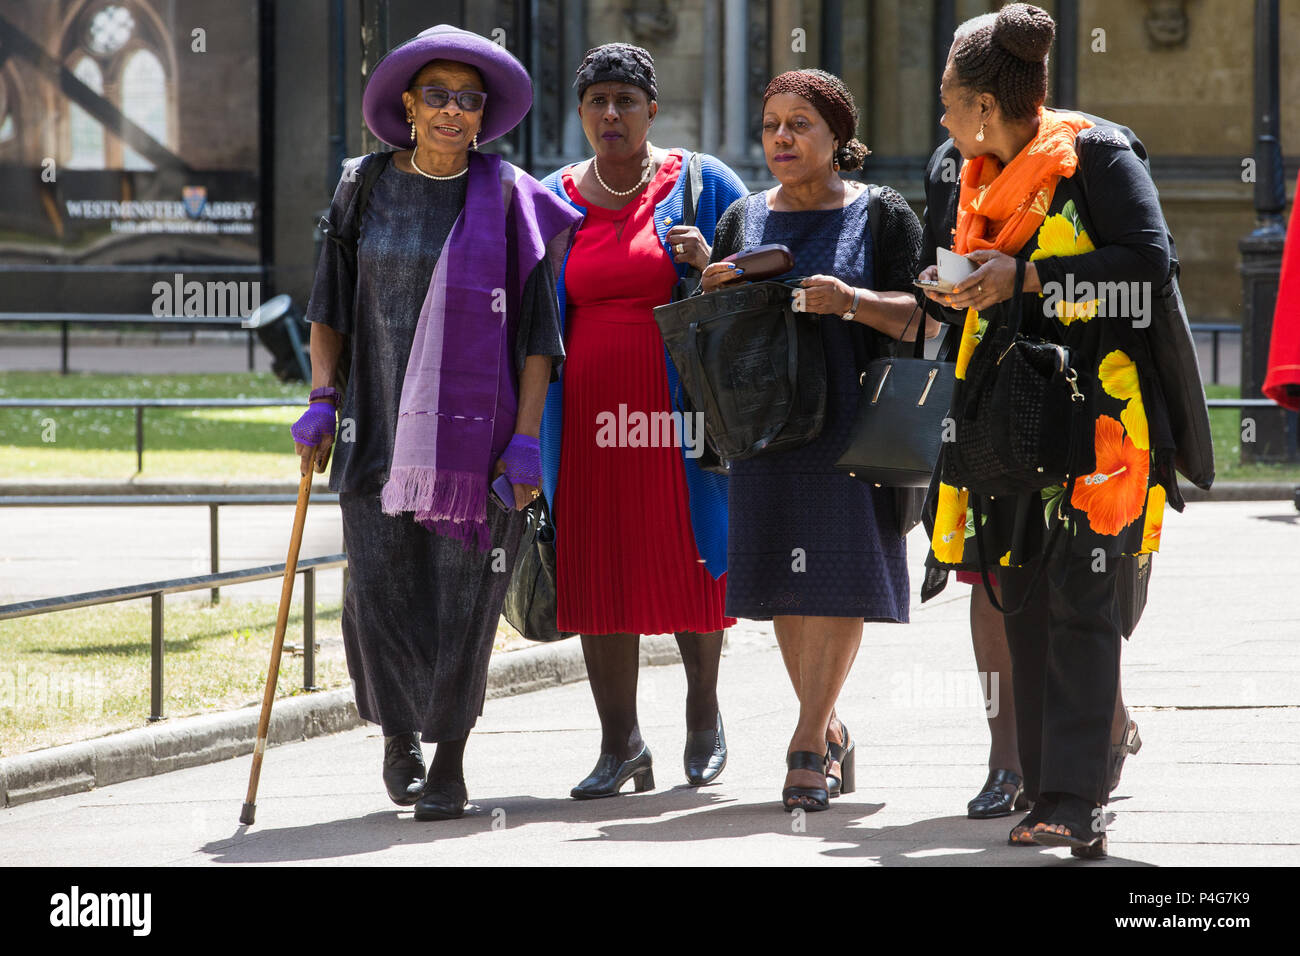 London, UK. 22nd June, 2018. Guests, including families of the Windrush generation, leave Westminster Abbey following a thanksgiving service to mark 70 years since the arrival of Caribbean migrants on the Empire Windrush ship to the UK. Credit: Mark Kerrison/Alamy Live News Stock Photo